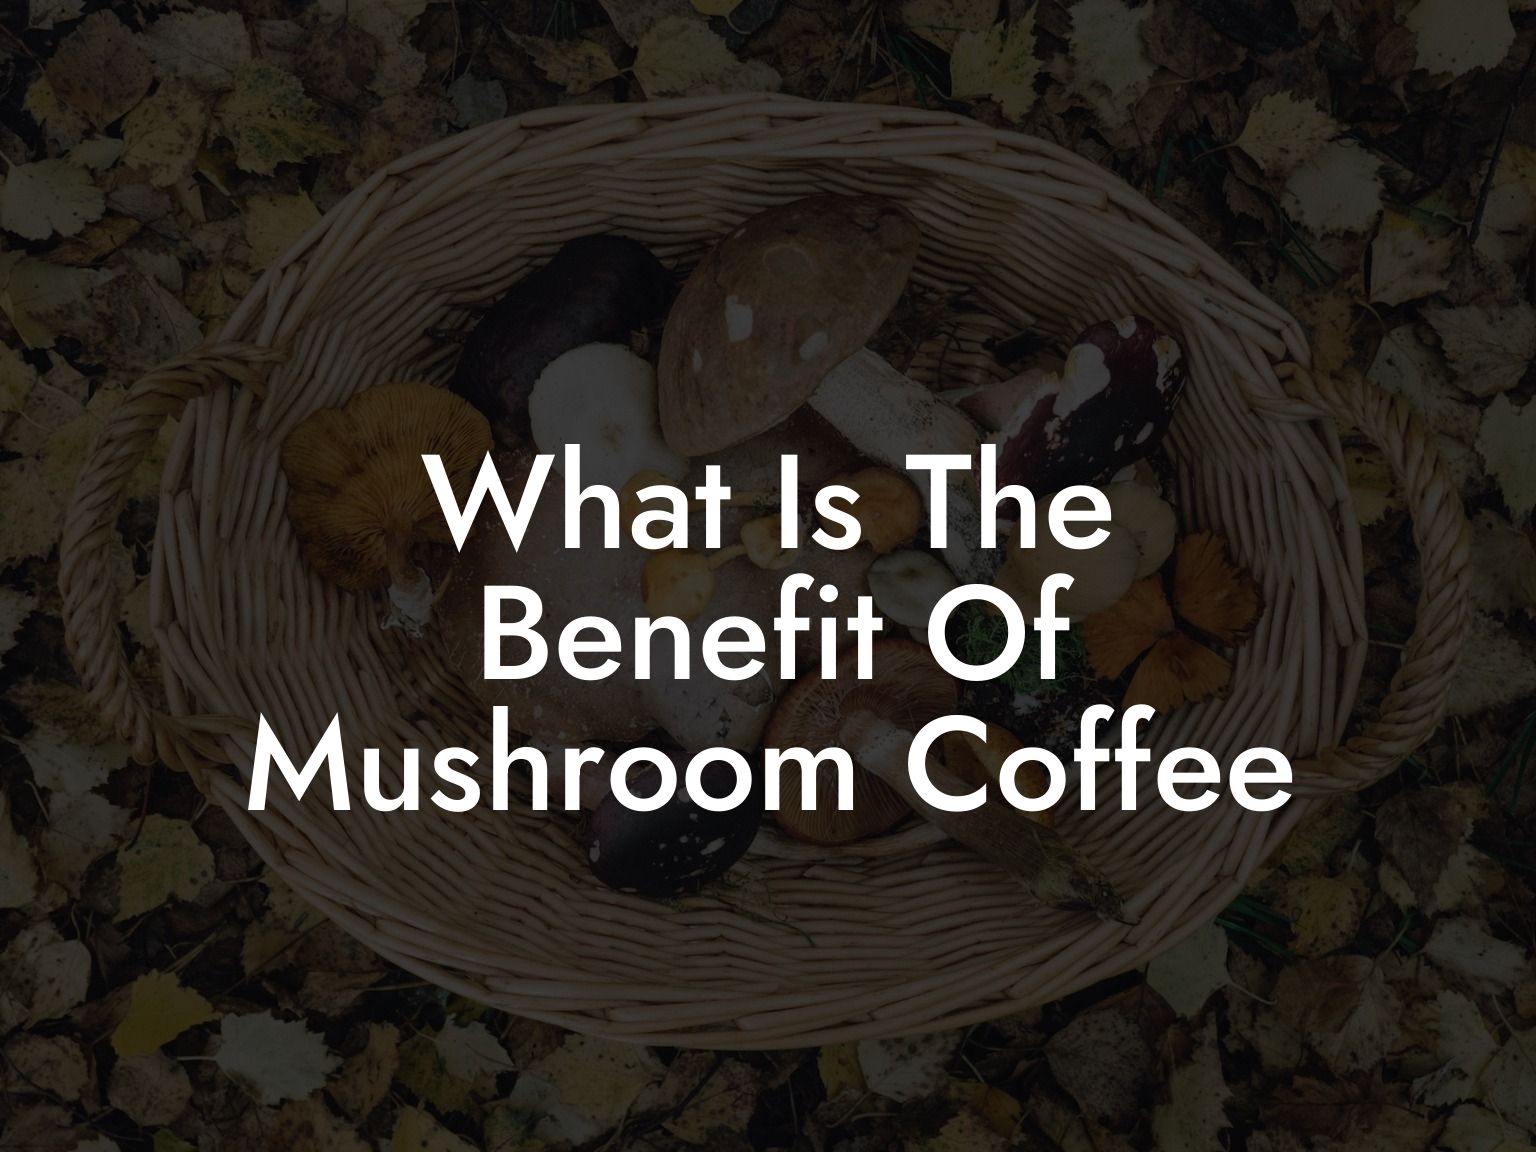 What Is The Benefit Of Mushroom Coffee